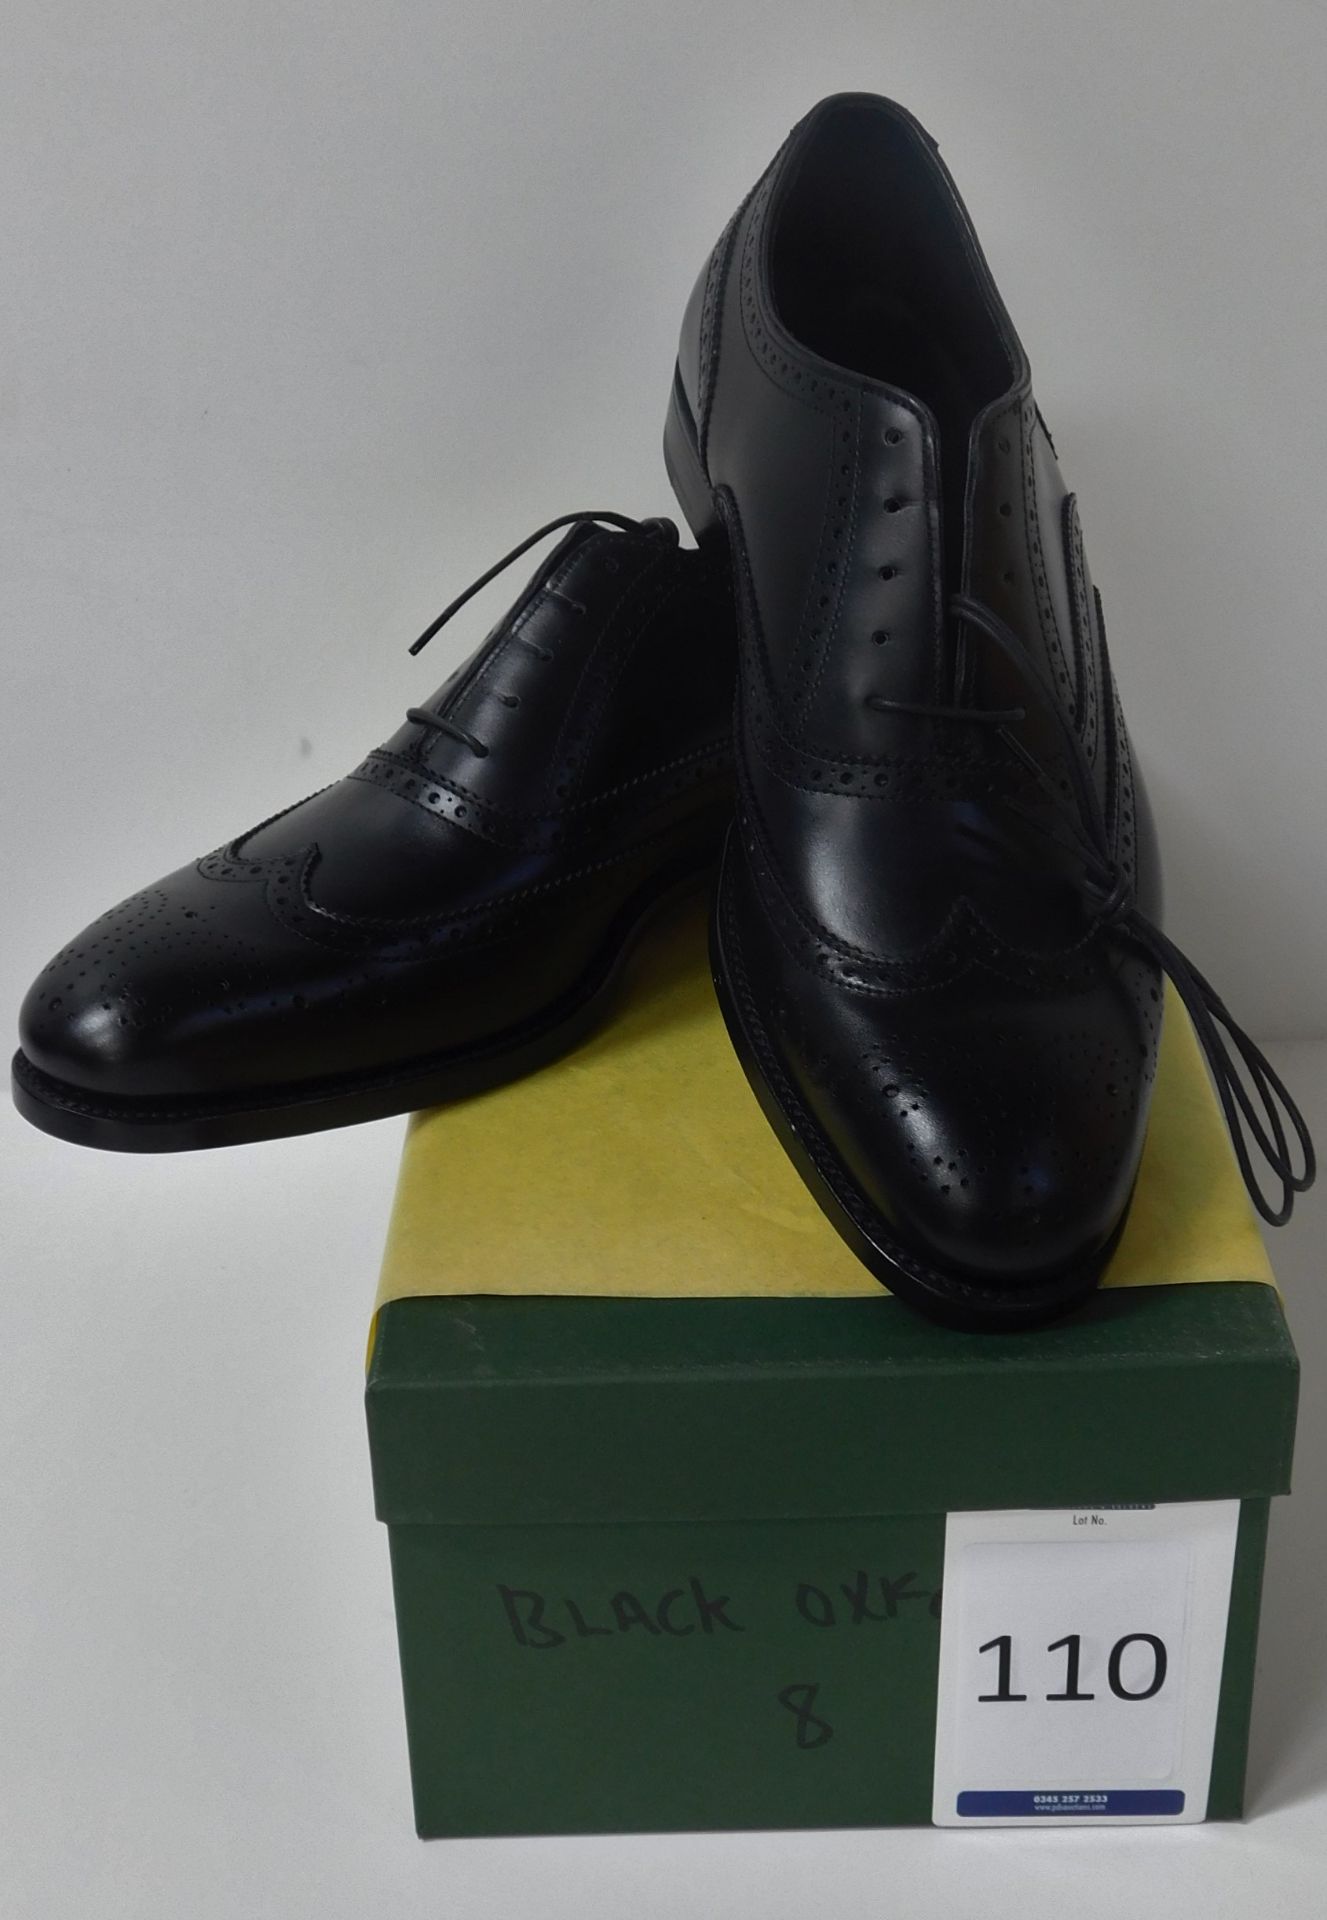 Pair of Alfred Sargent Black Oxford, Size 8 (Slight Seconds) (Location: Brentwood - See General